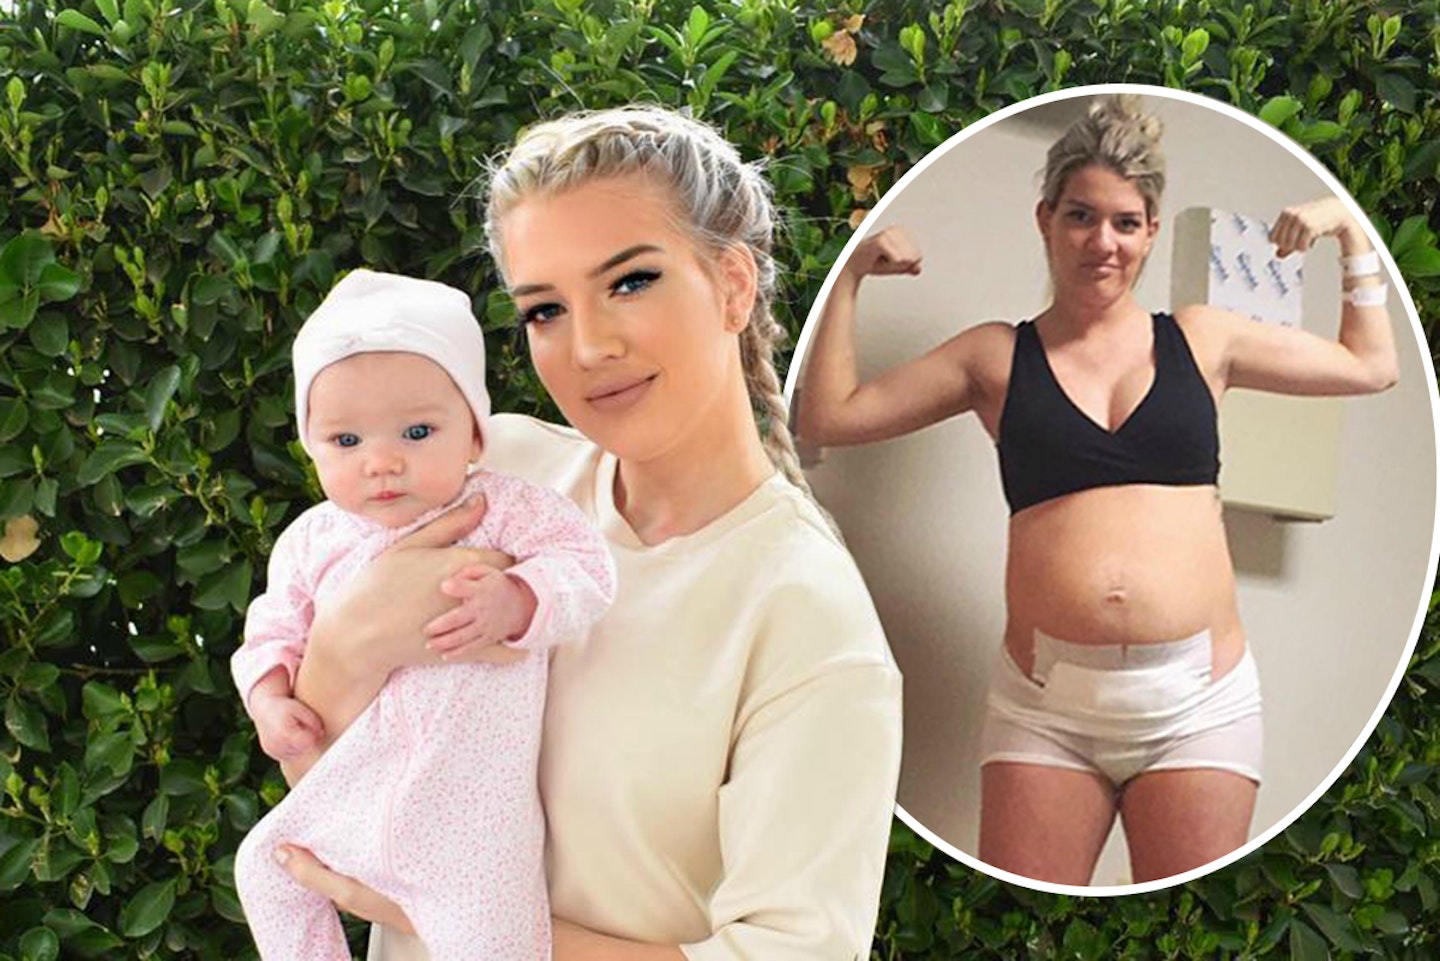 mum-blogger-hits-back-haters-powerful-postpartum-childbirth-pic-ruth-lee